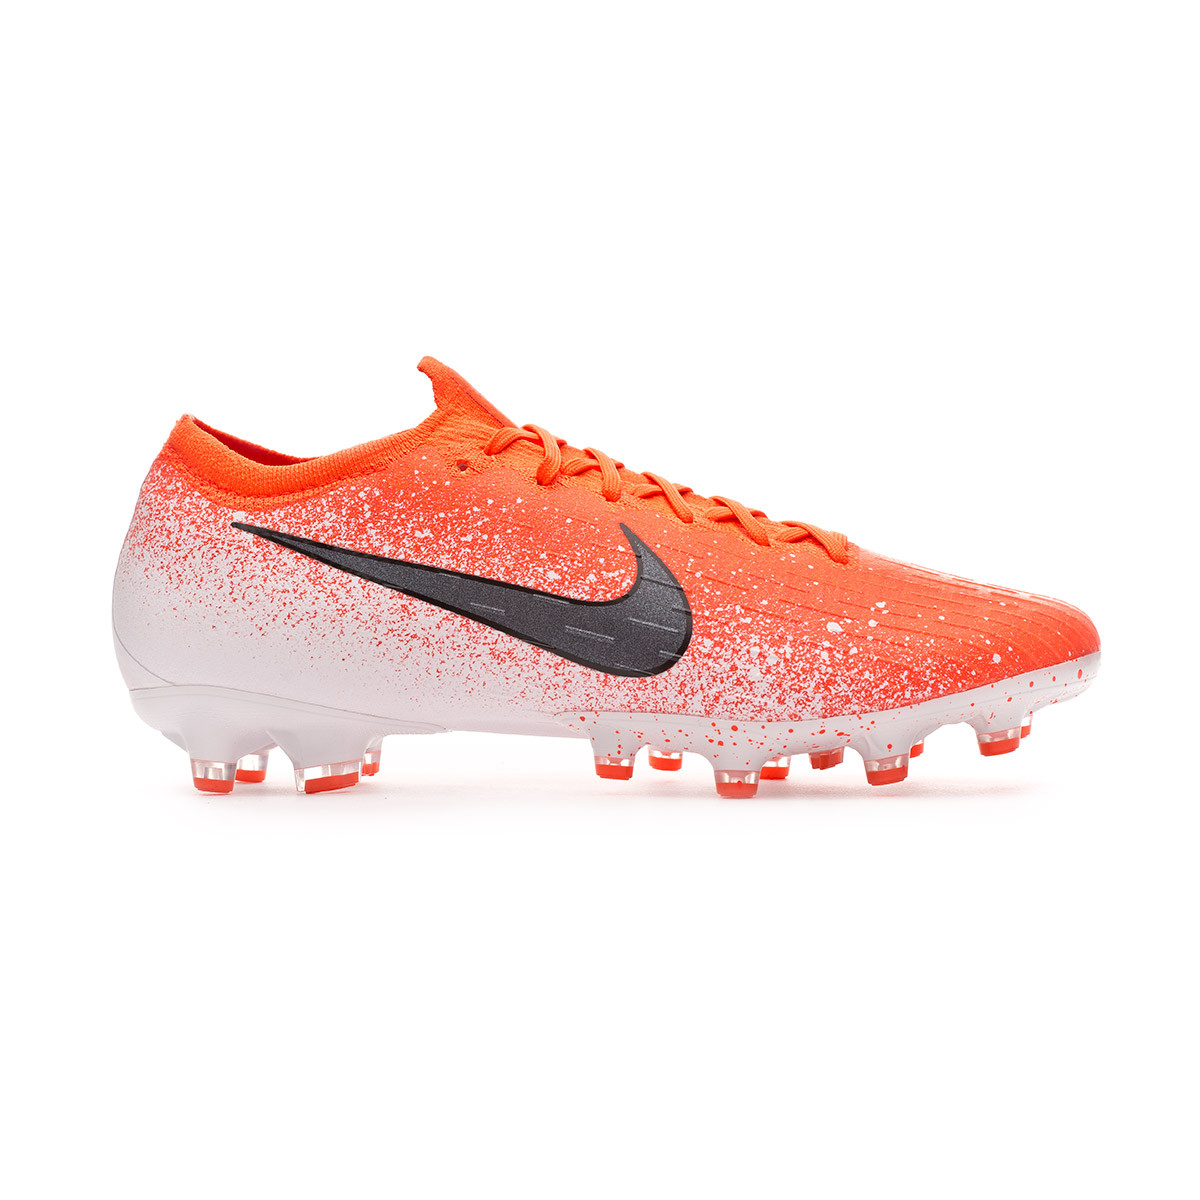 nike football boots size 12 online -